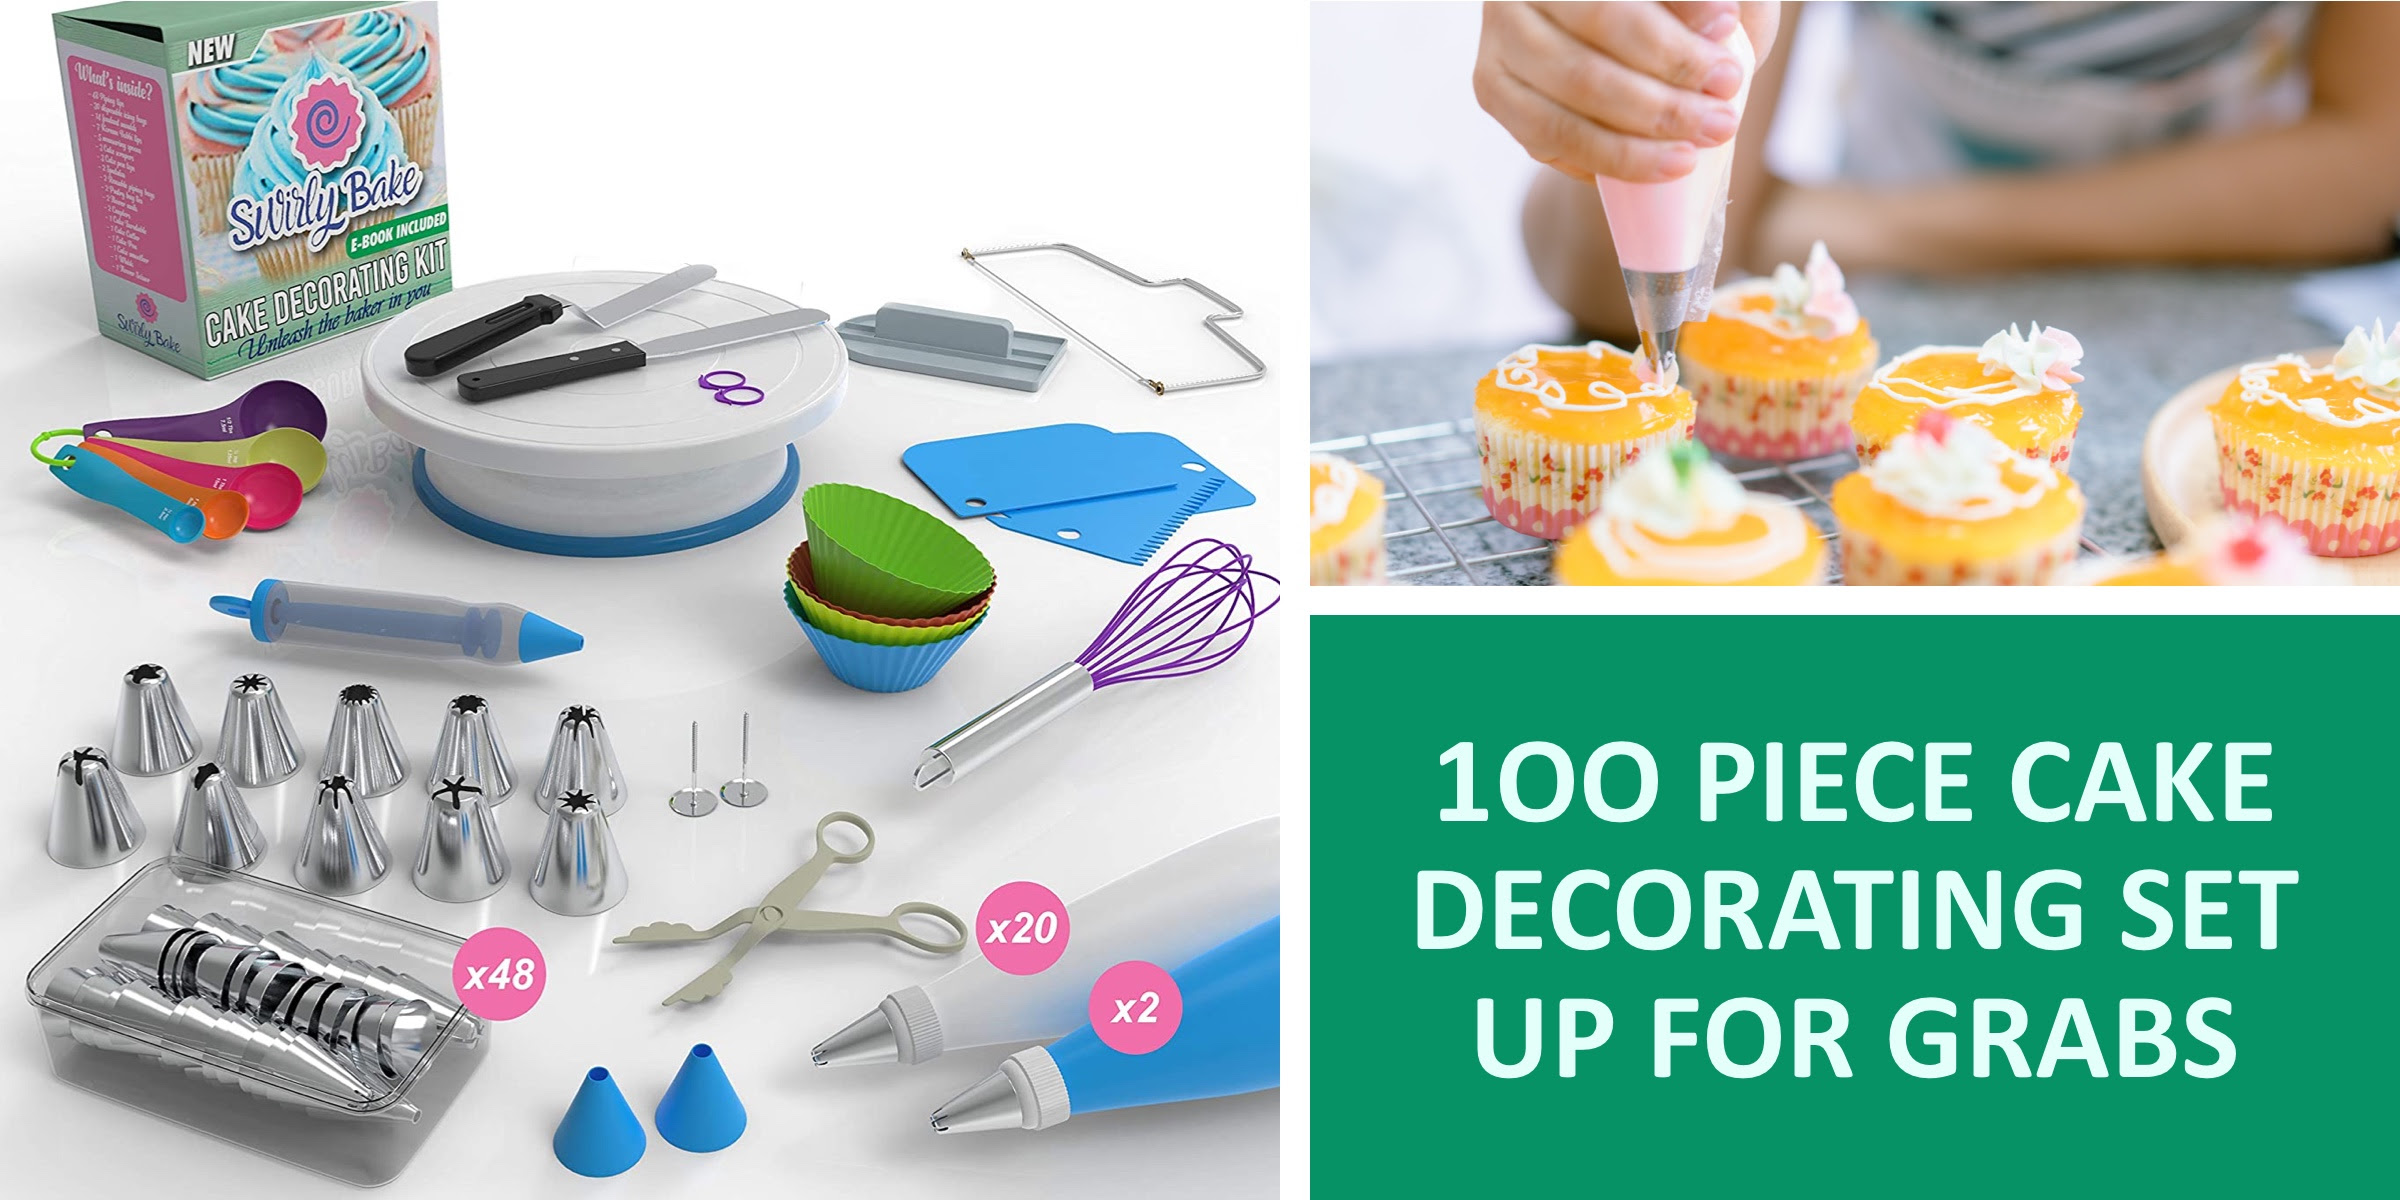 We're giving away sets of Swirly Bake 100 Piece Cake Decorating Kits